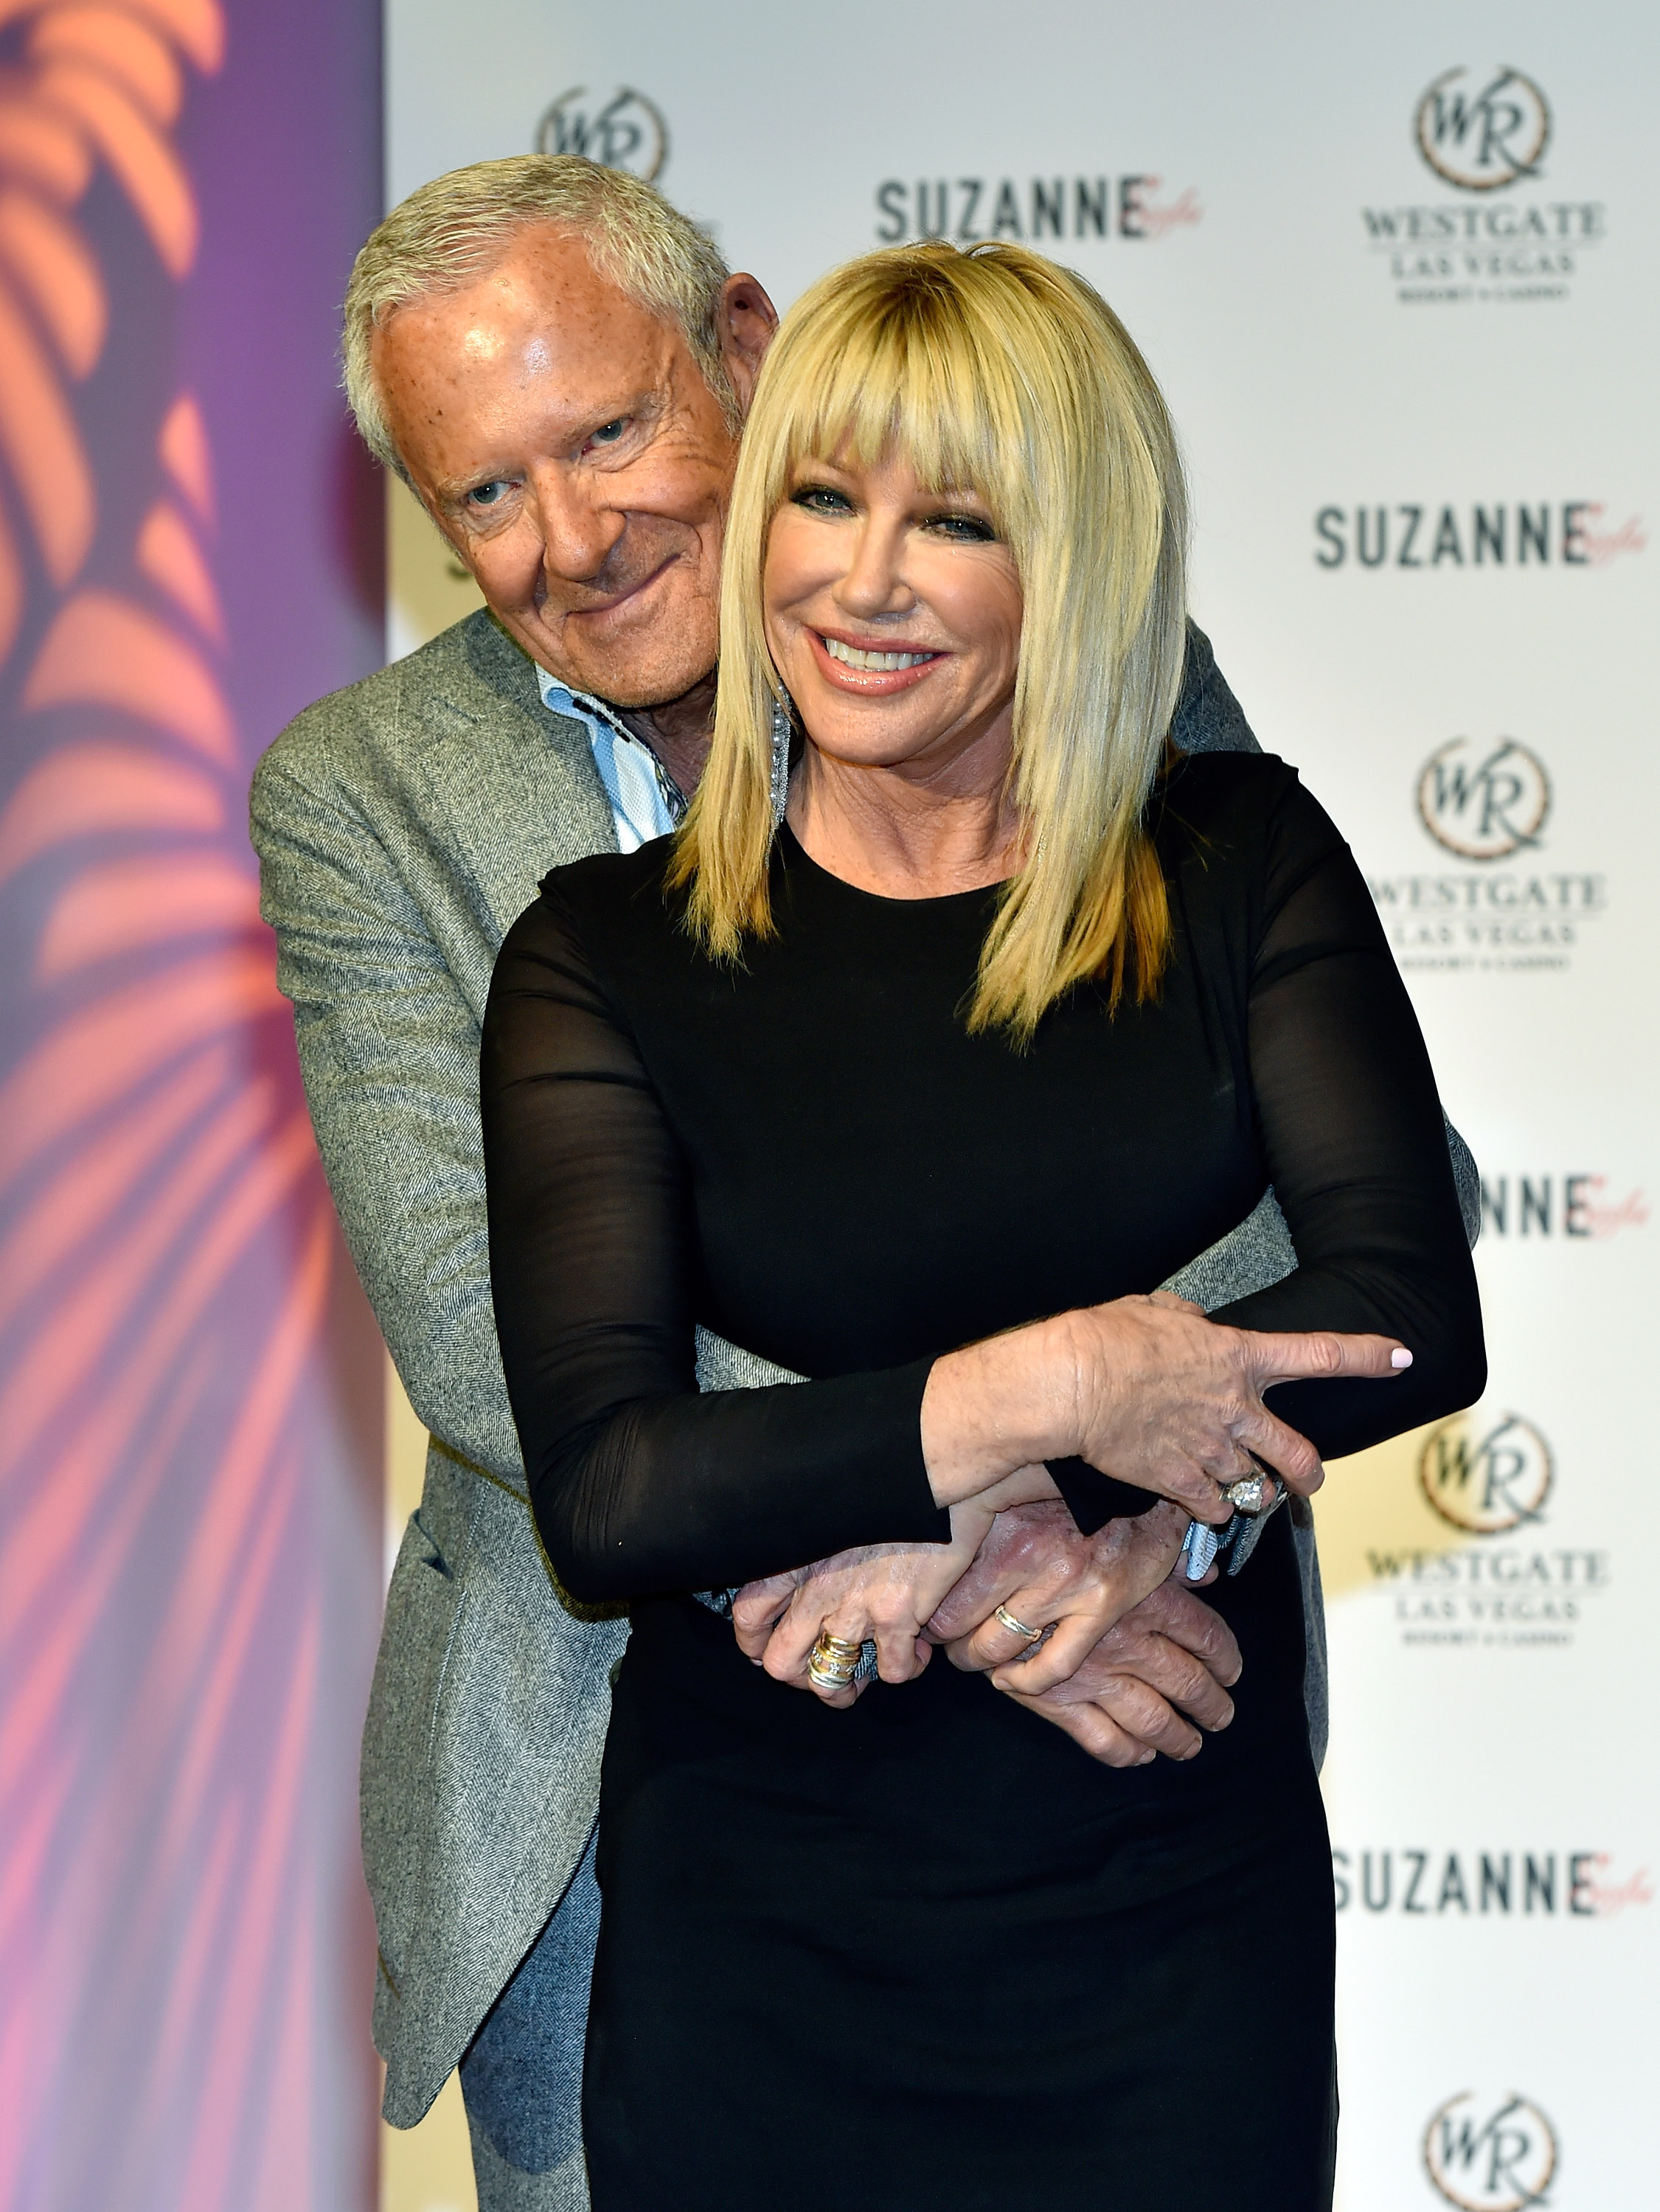 Alan Hamel and Suzanne Somers at the "Suzanne Sizzles" press conference in Las Vegas, Nevada on March 25, 2015  | Source: Getty Images